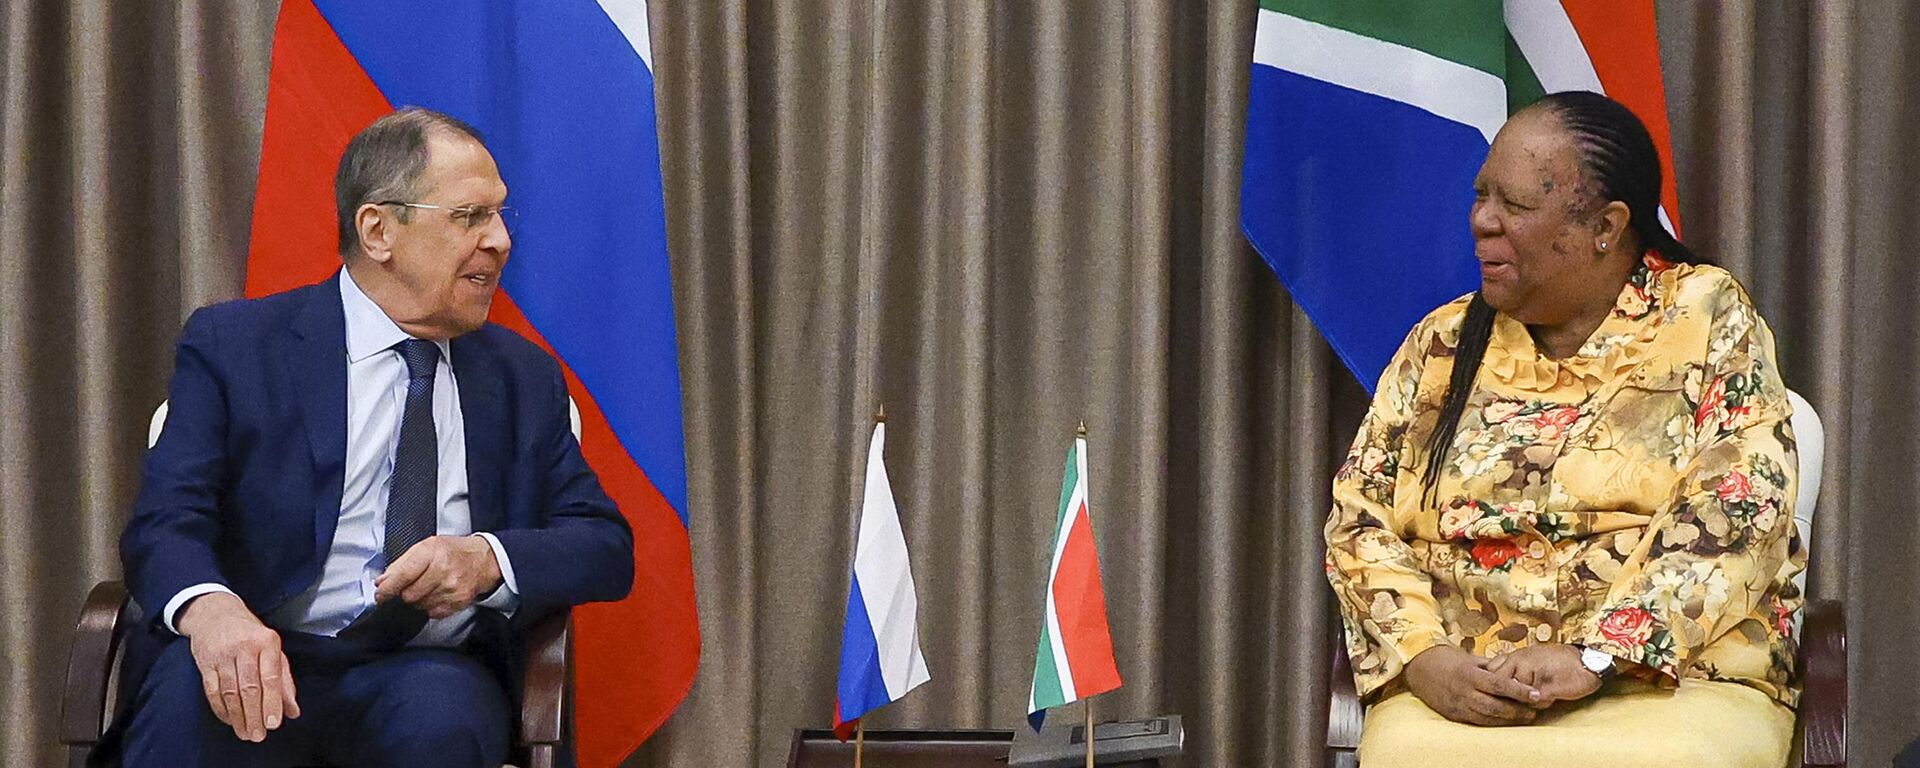 In this photo released by the Russian Foreign Ministry Press Service, Russia's Foreign Minister Sergey Lavrov, left, and his South Africa's counterpart Naledi Pandor, speak, during their meeting in Pretoria, South Africa, Monday, Jan. 23, 2023 - Sputnik International, 1920, 23.01.2023